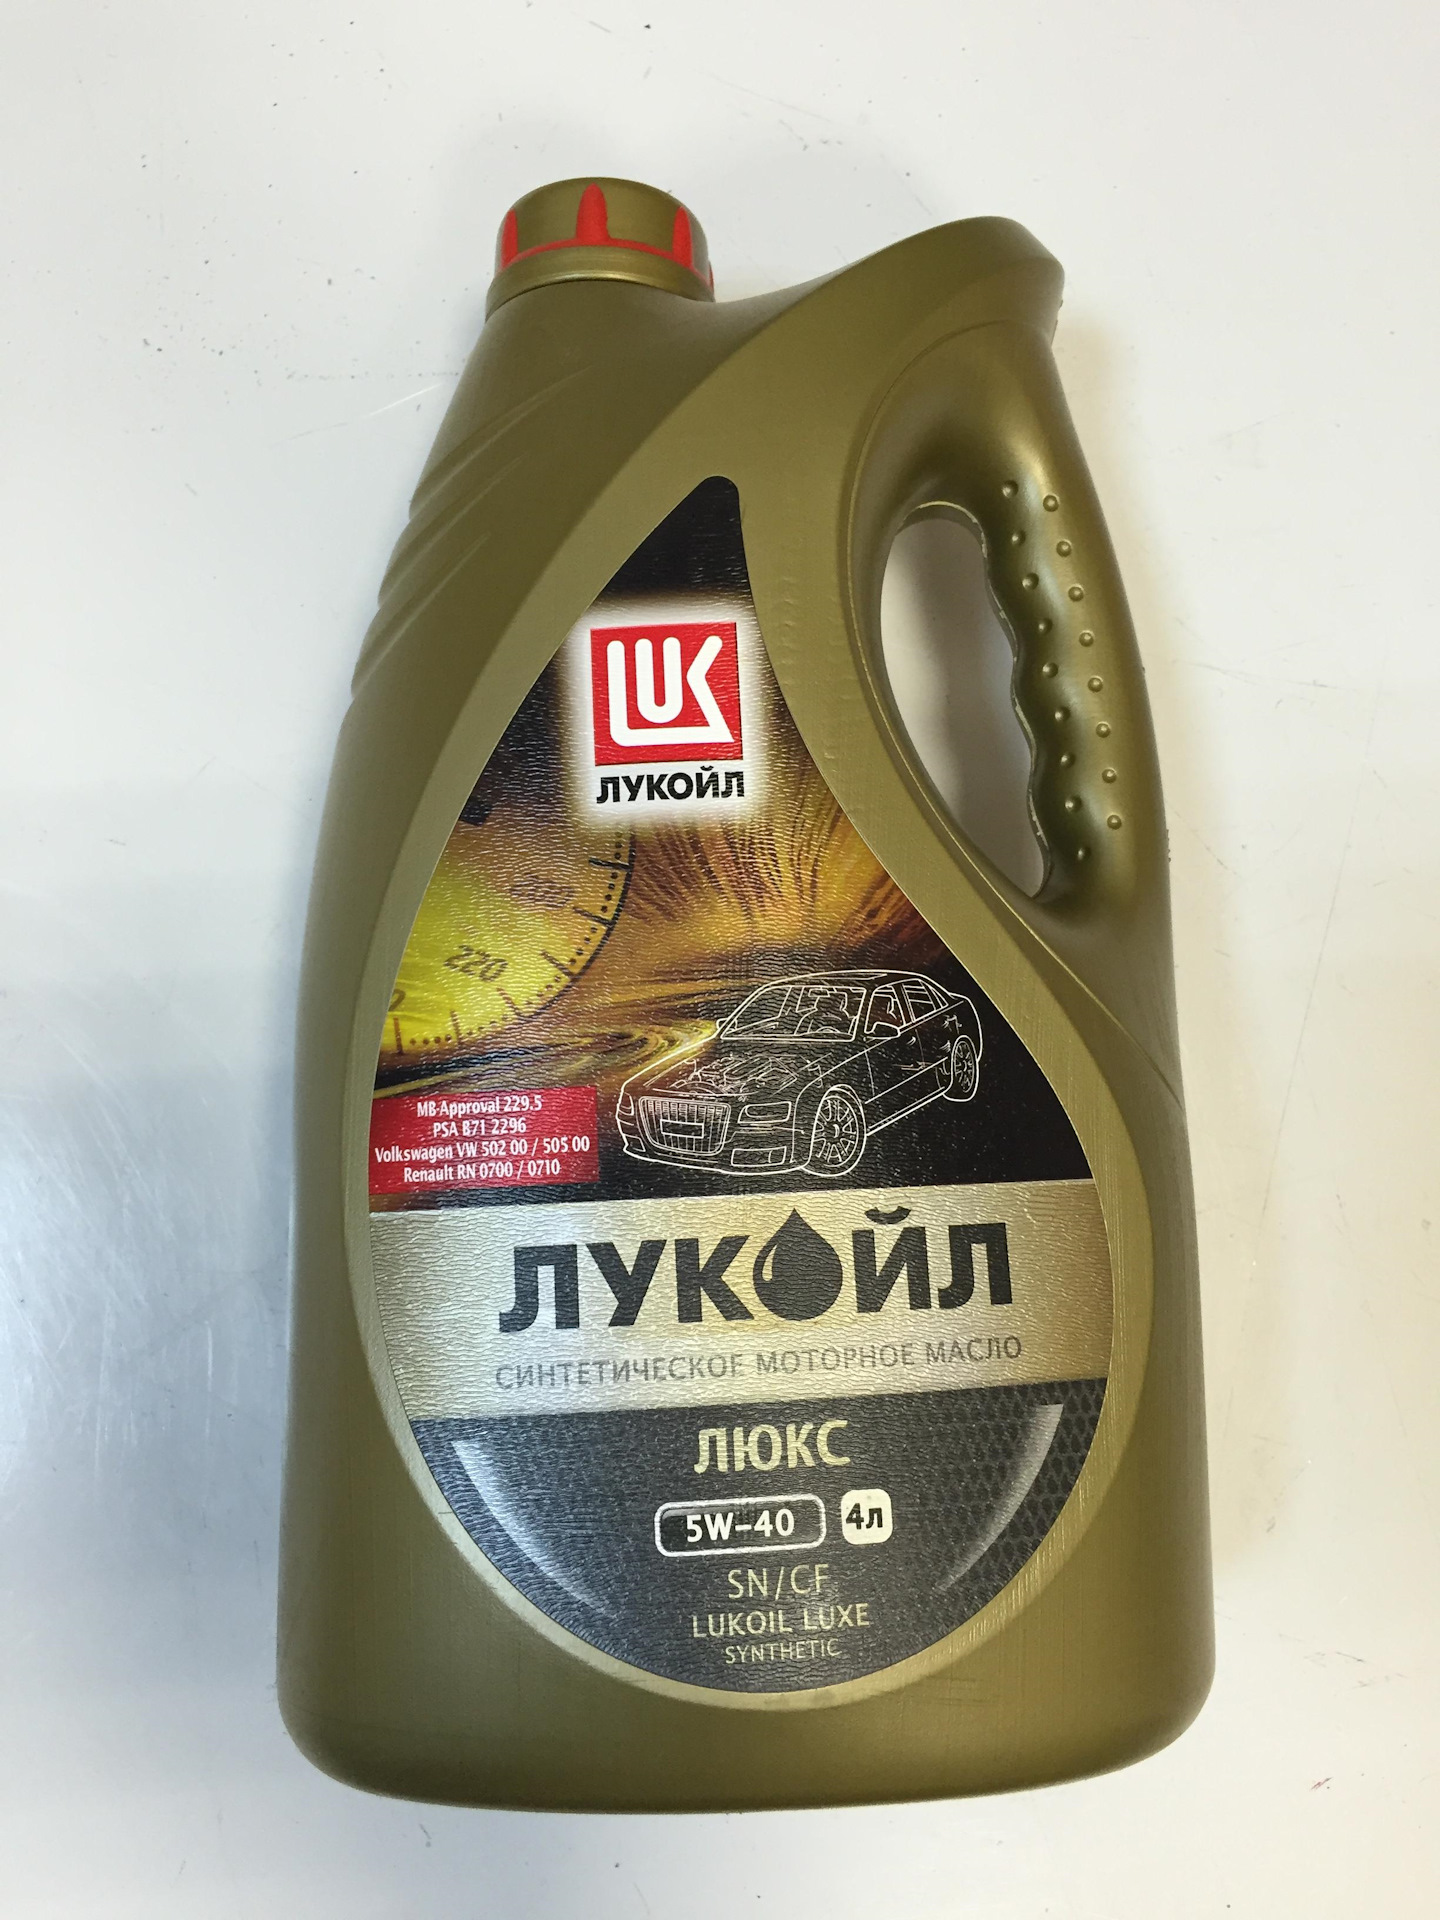 Лукойл 5 40 отзывы. Масло Лукойл Luxe 5w40. Lukoil Luxe 5w-40. Лукойл Люкс 5w40 синтетика 20л. Масло Лукойл Luxe 5w40 4л артикул.